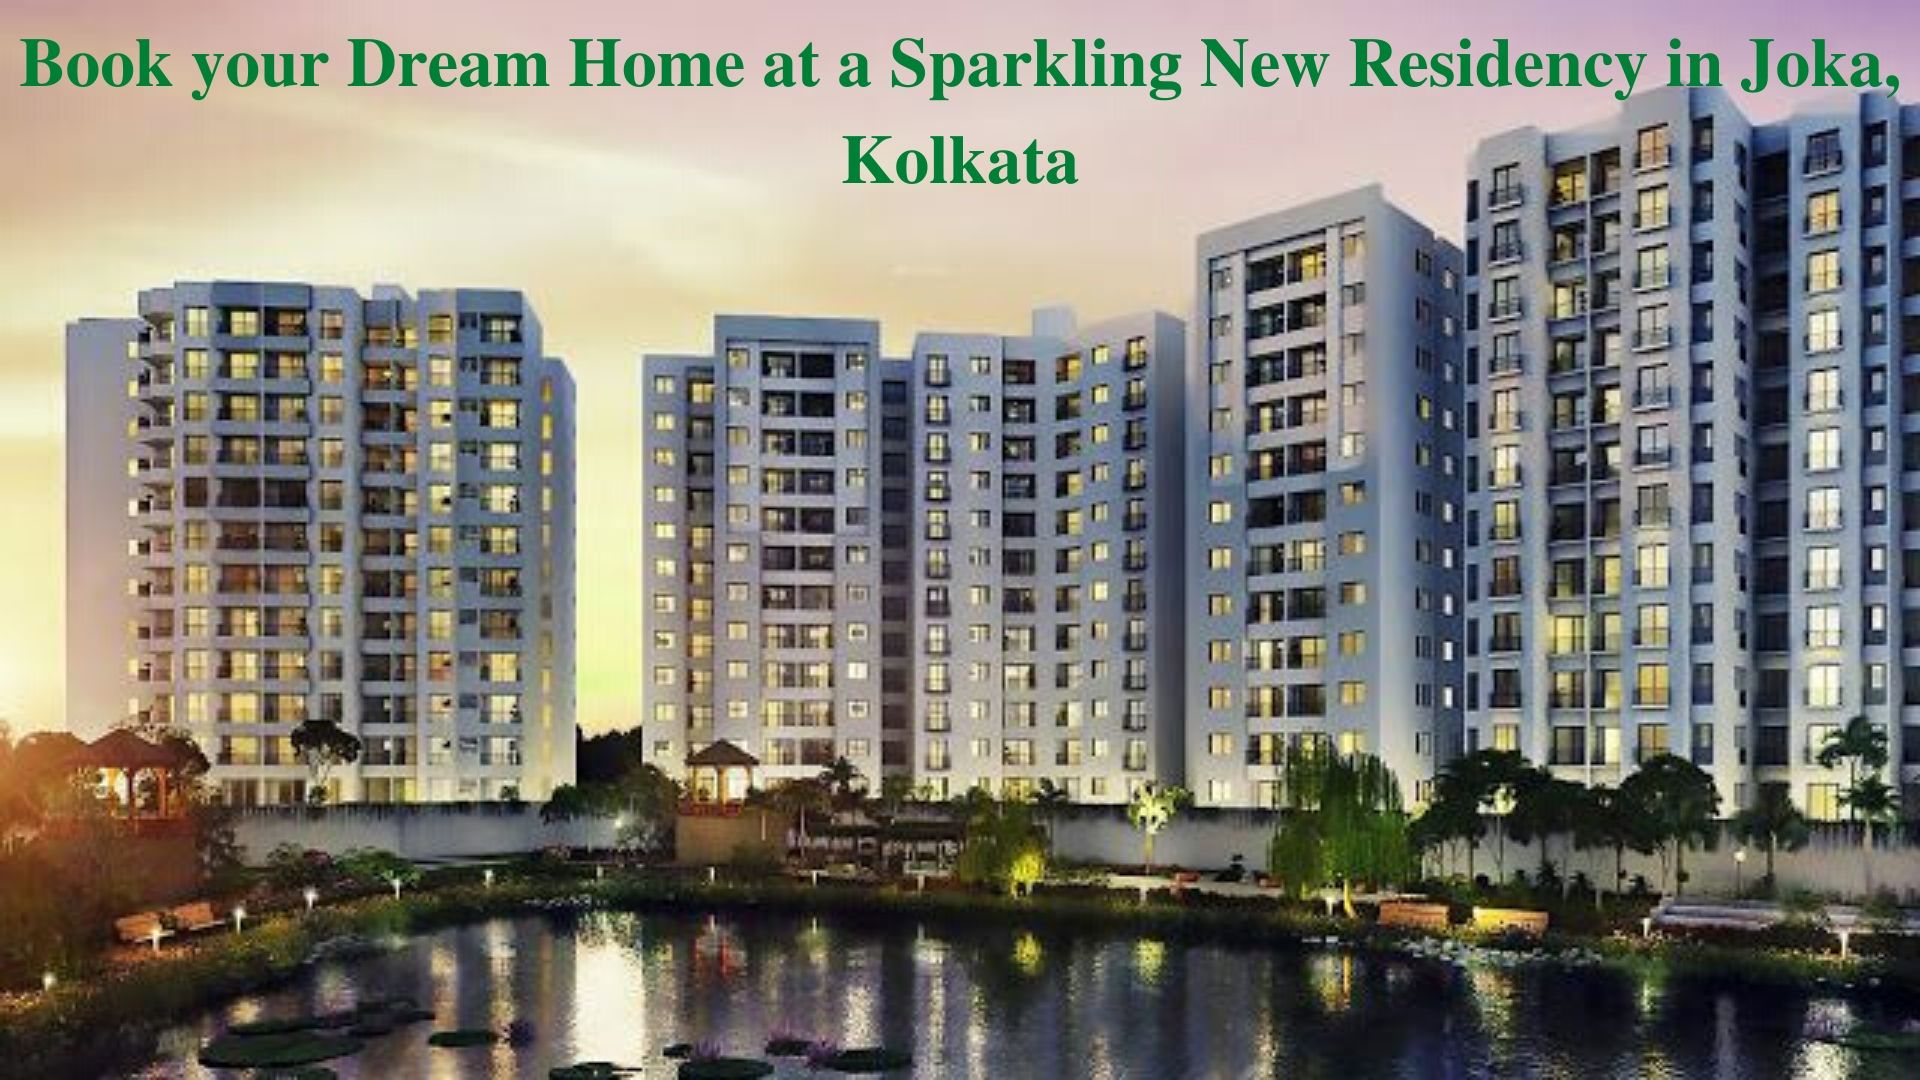 Book your Dream Home at a Sparkling New Residency in Joka, Kolkata